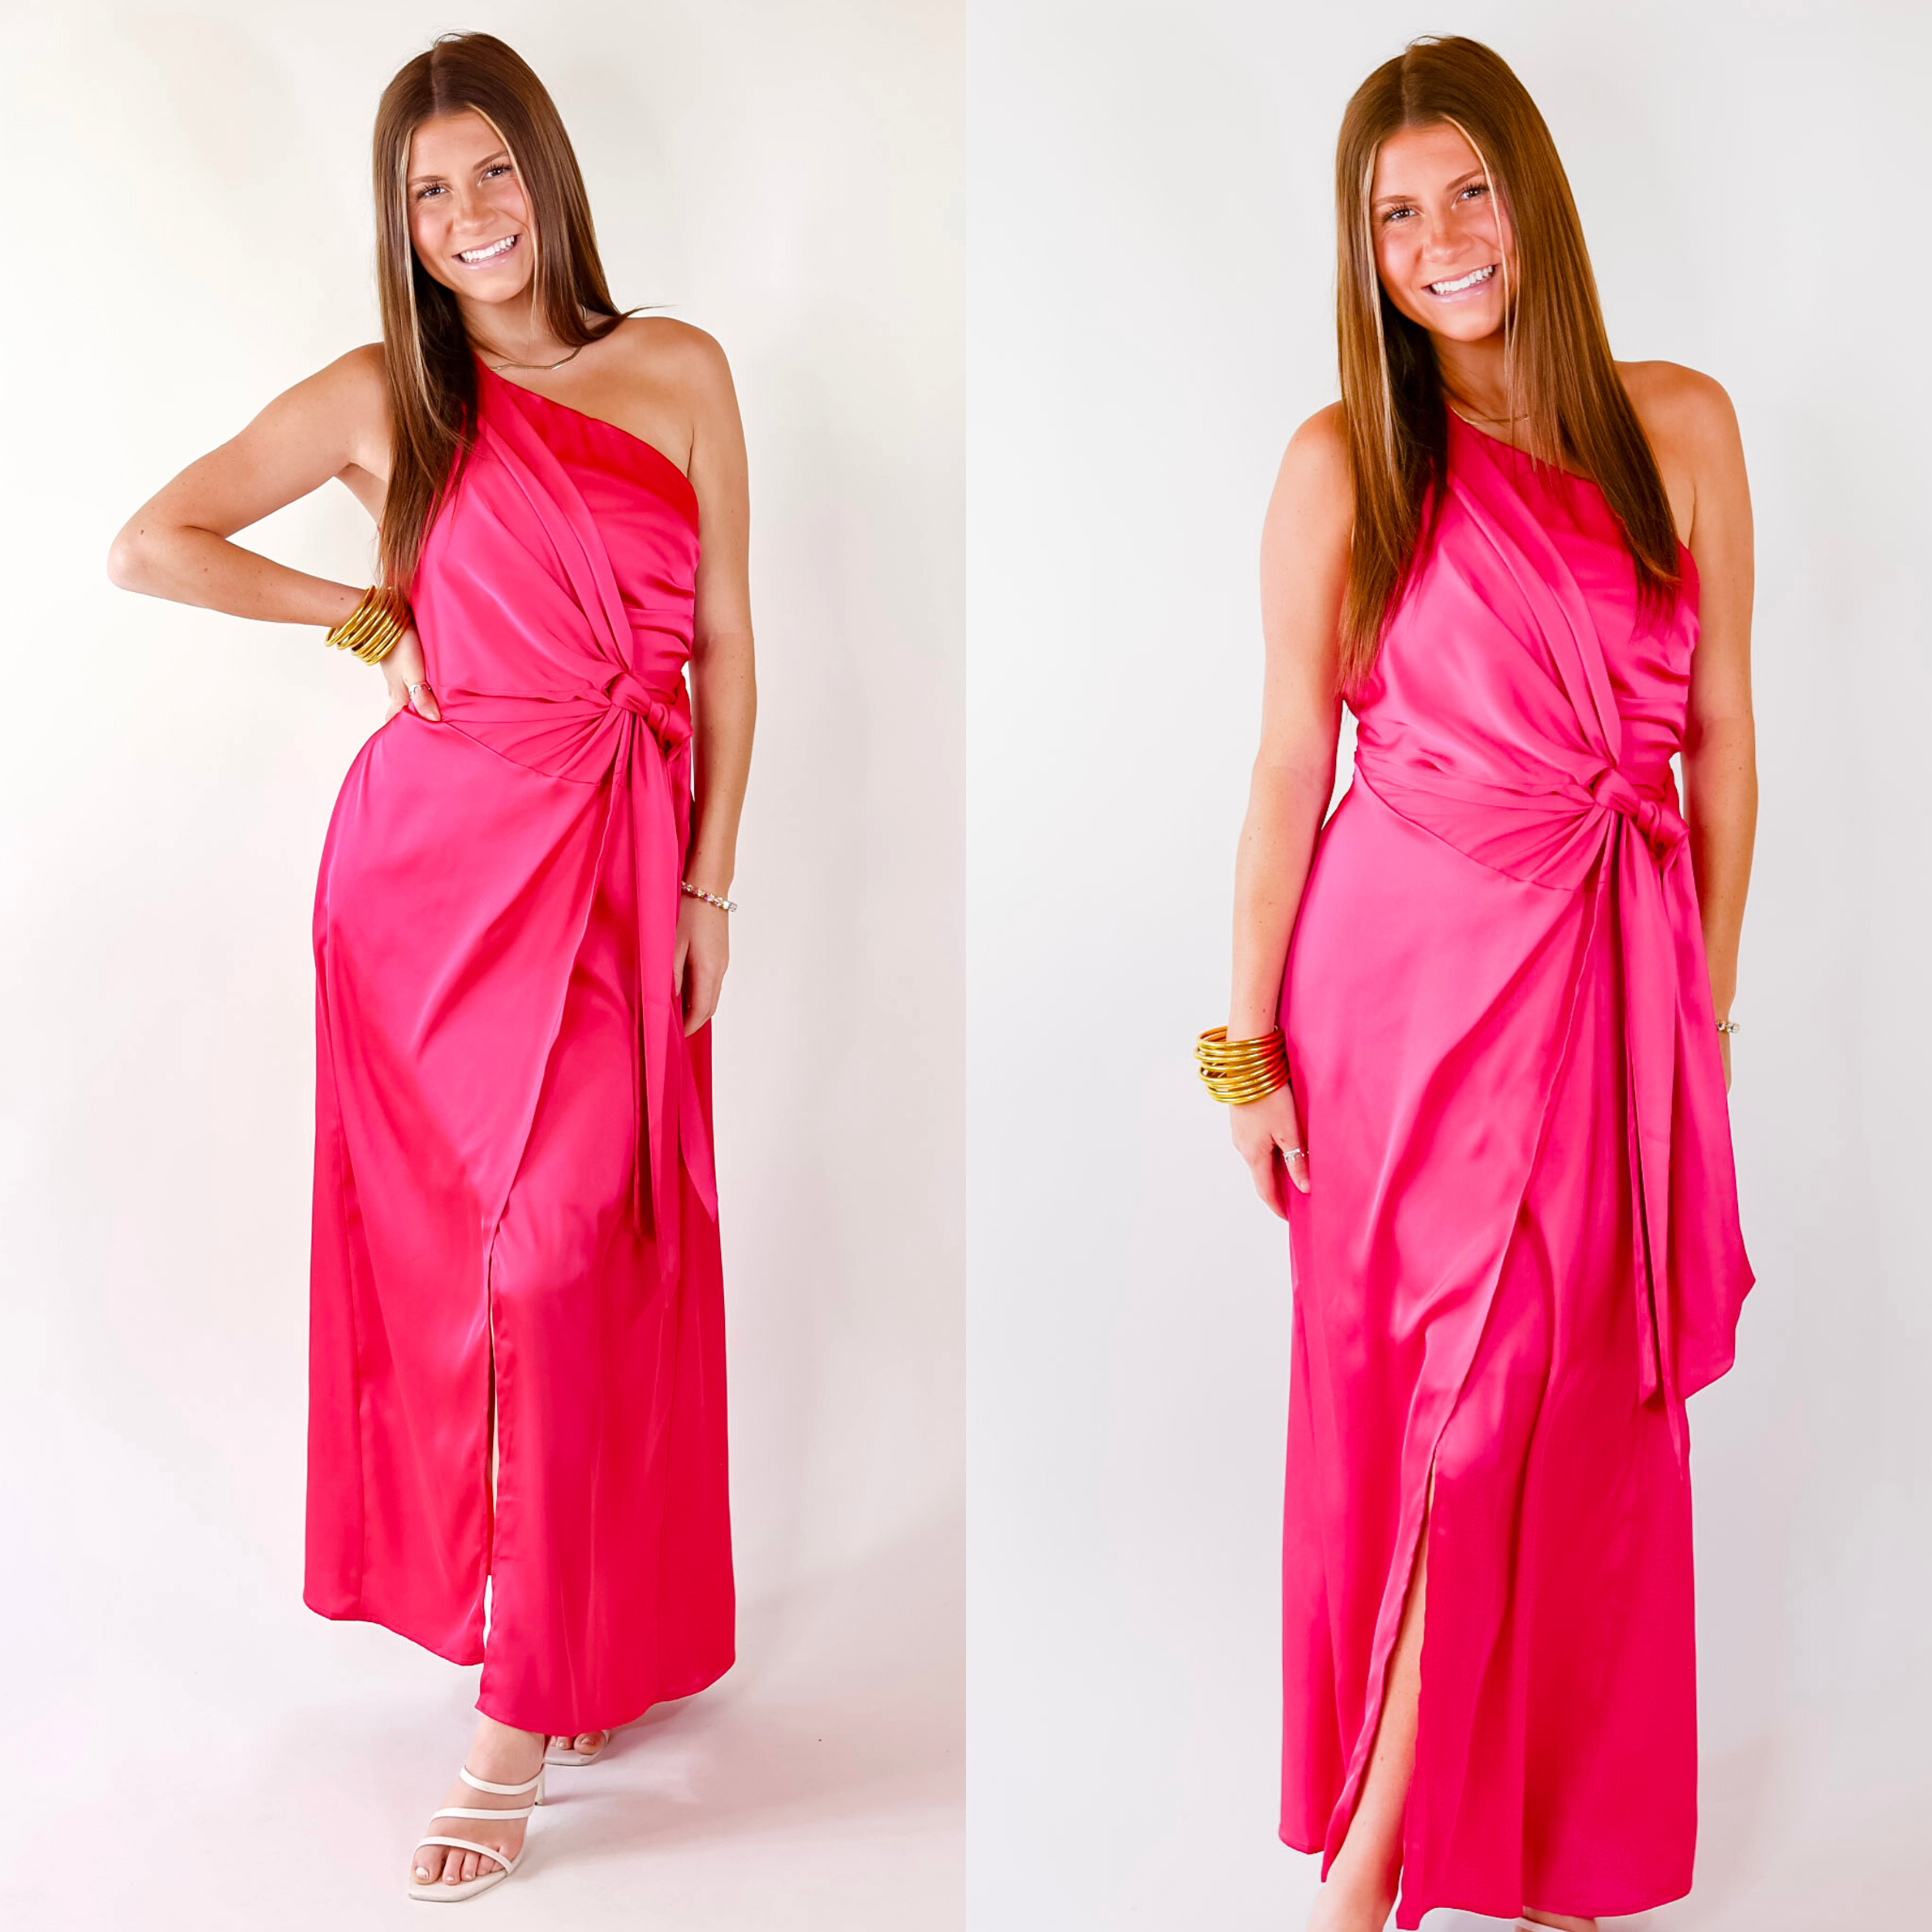 Luxury Glam One Shoulder Slit Dress in Fuschia Pink - Giddy Up Glamour Boutique